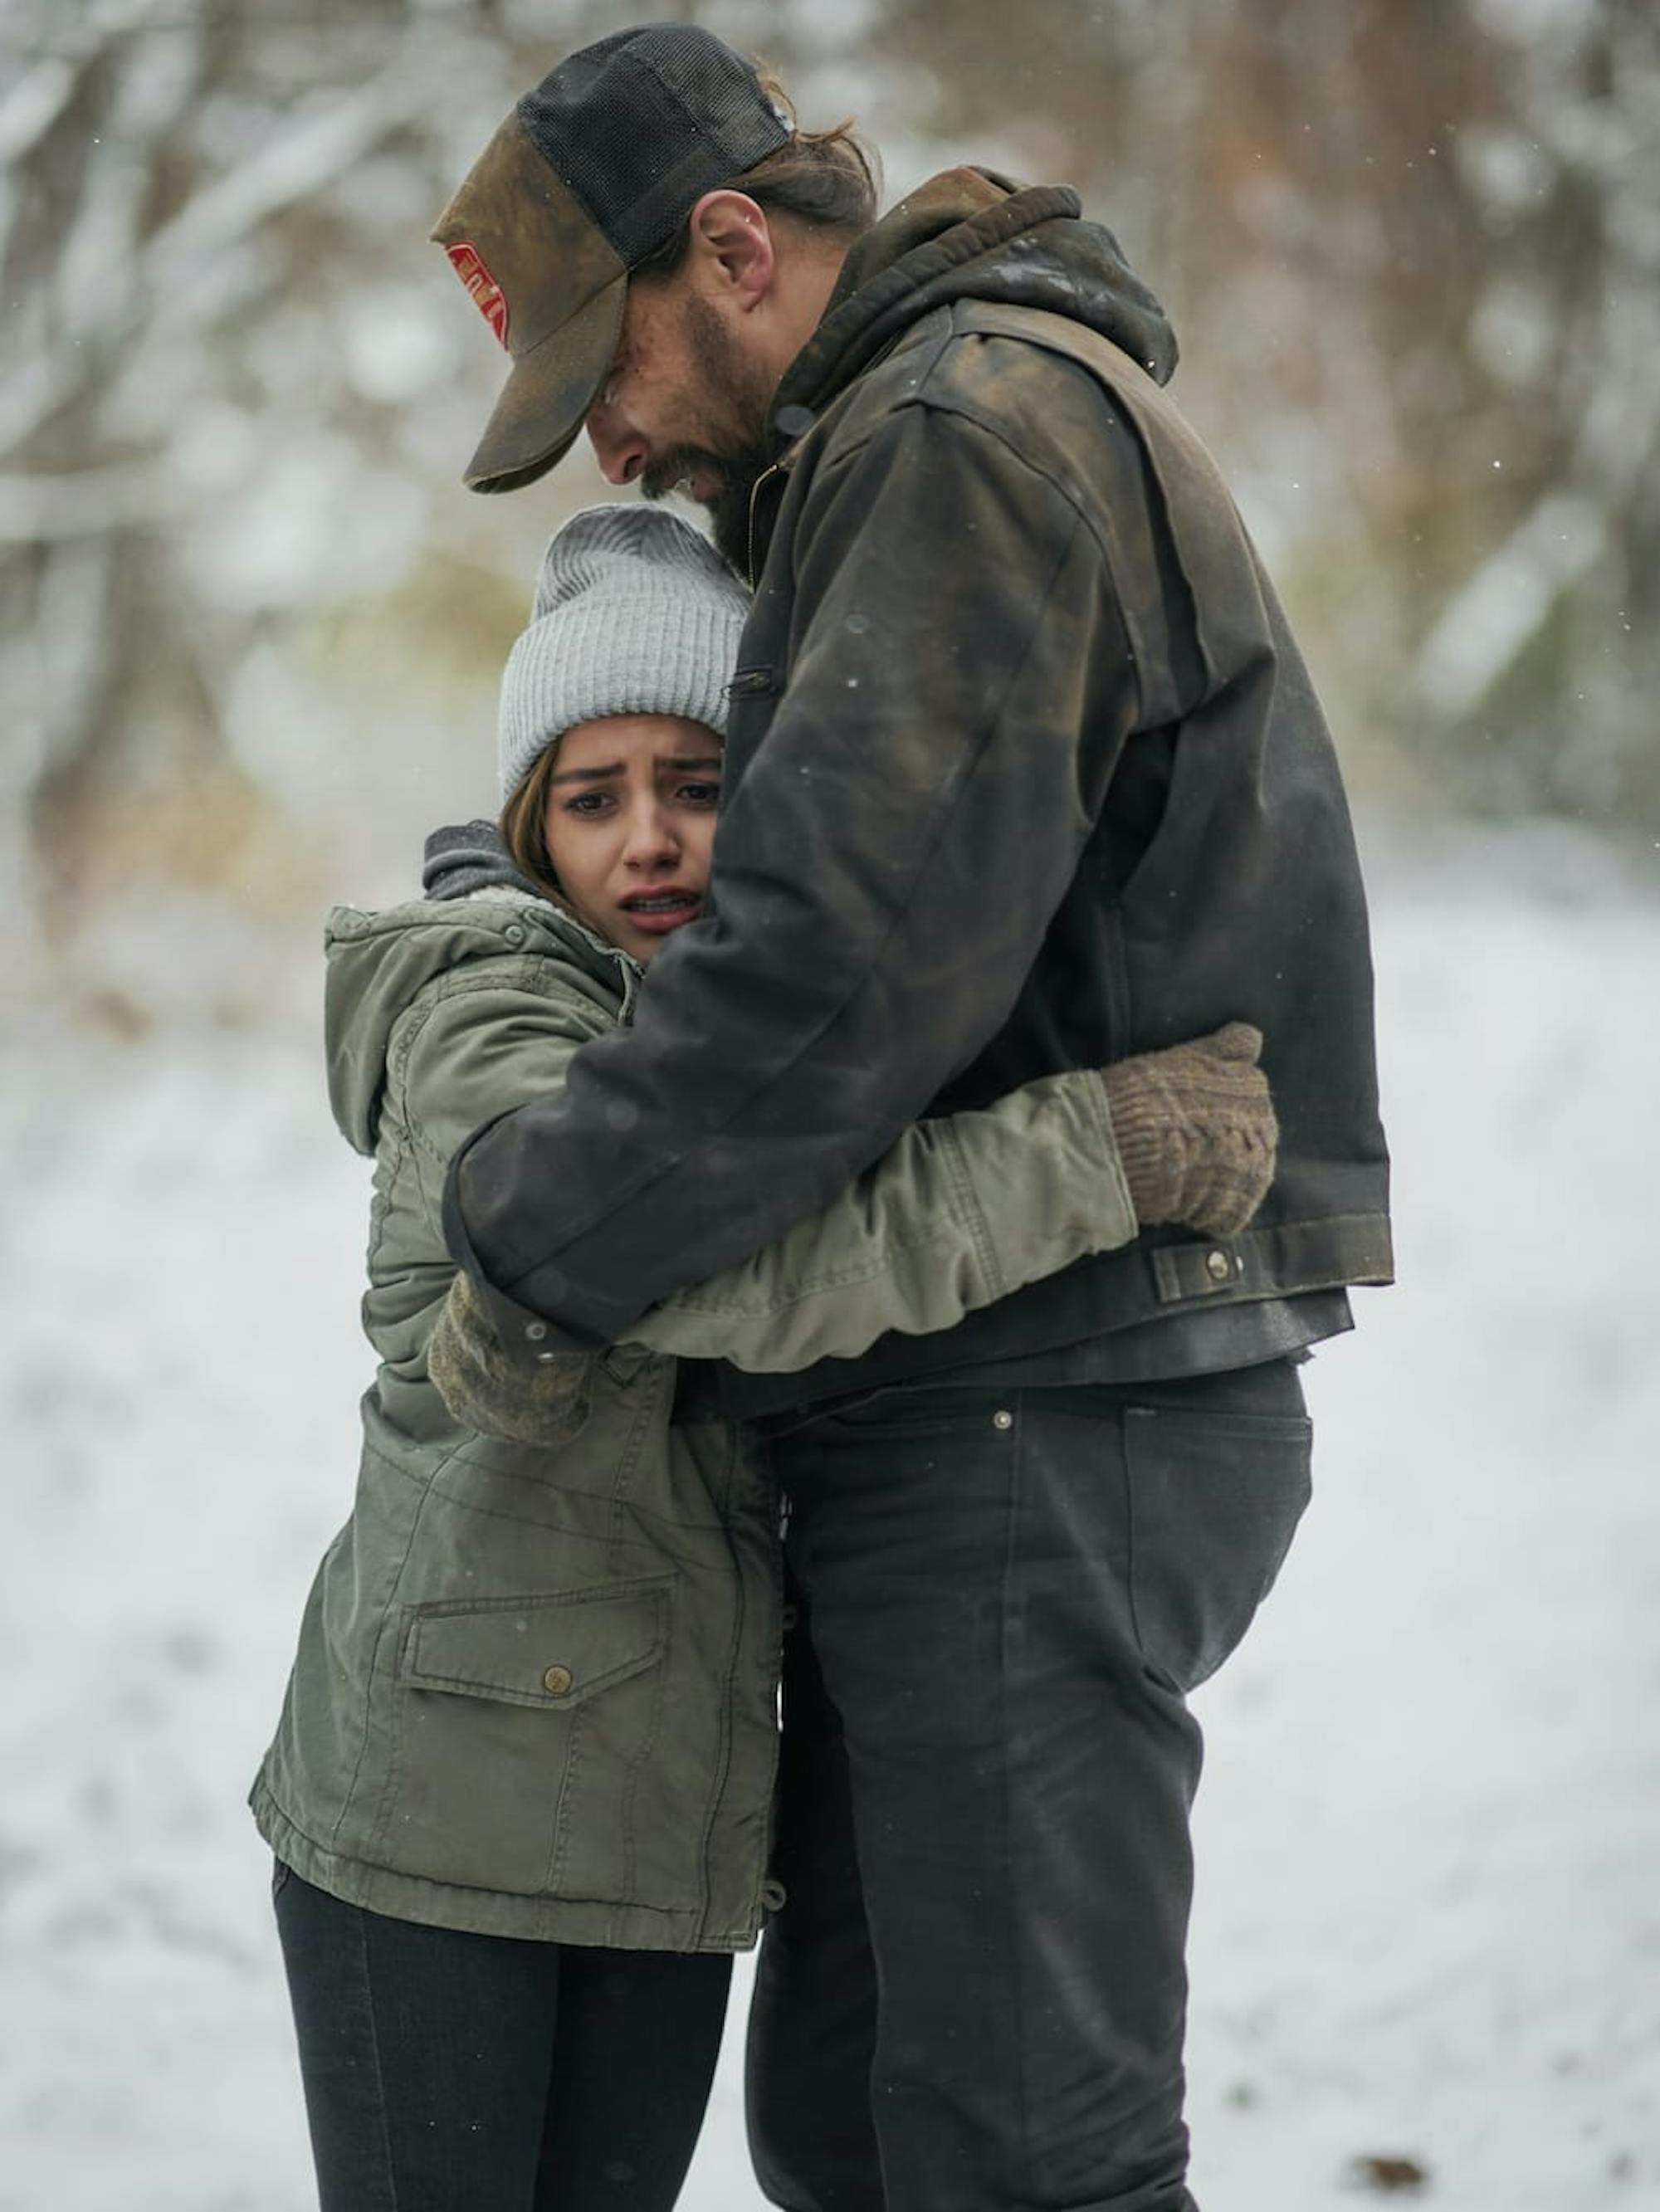 Rachel Cooper (Isabela Merced) and Ray Cooper (Jason Momoa) in Sweet Girl stand in a snowy field, bundled in dark coats and look afraid.